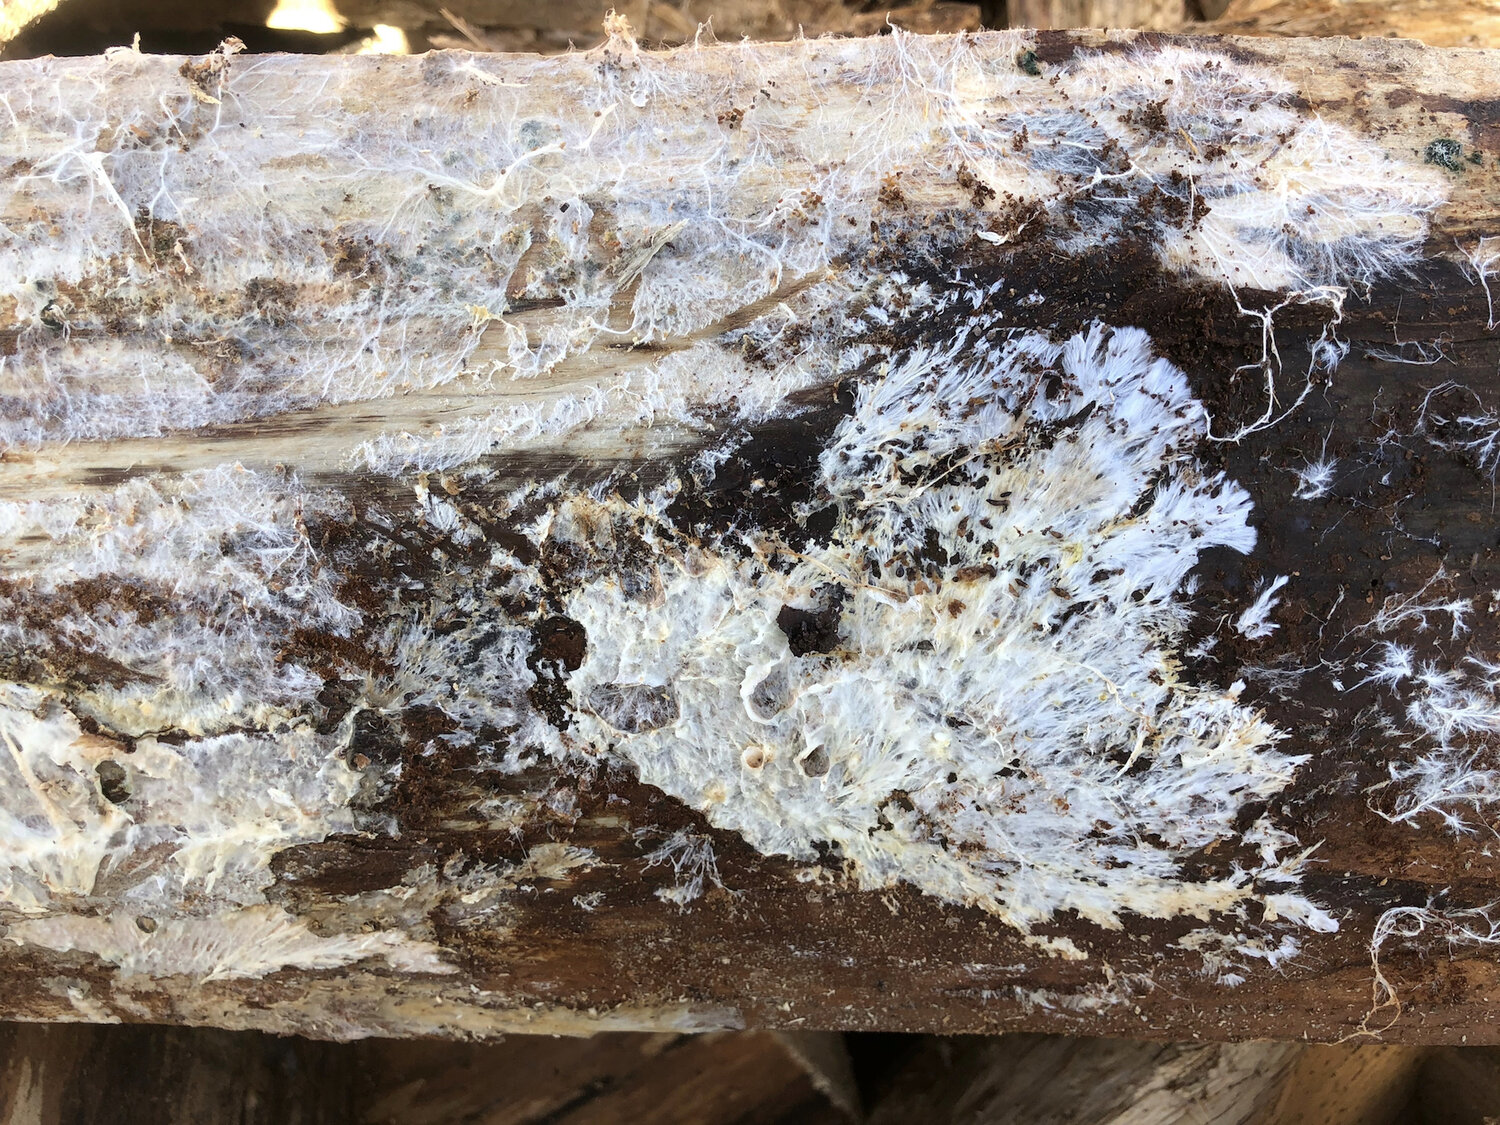 Can You Burn Wood With Mold on It? 